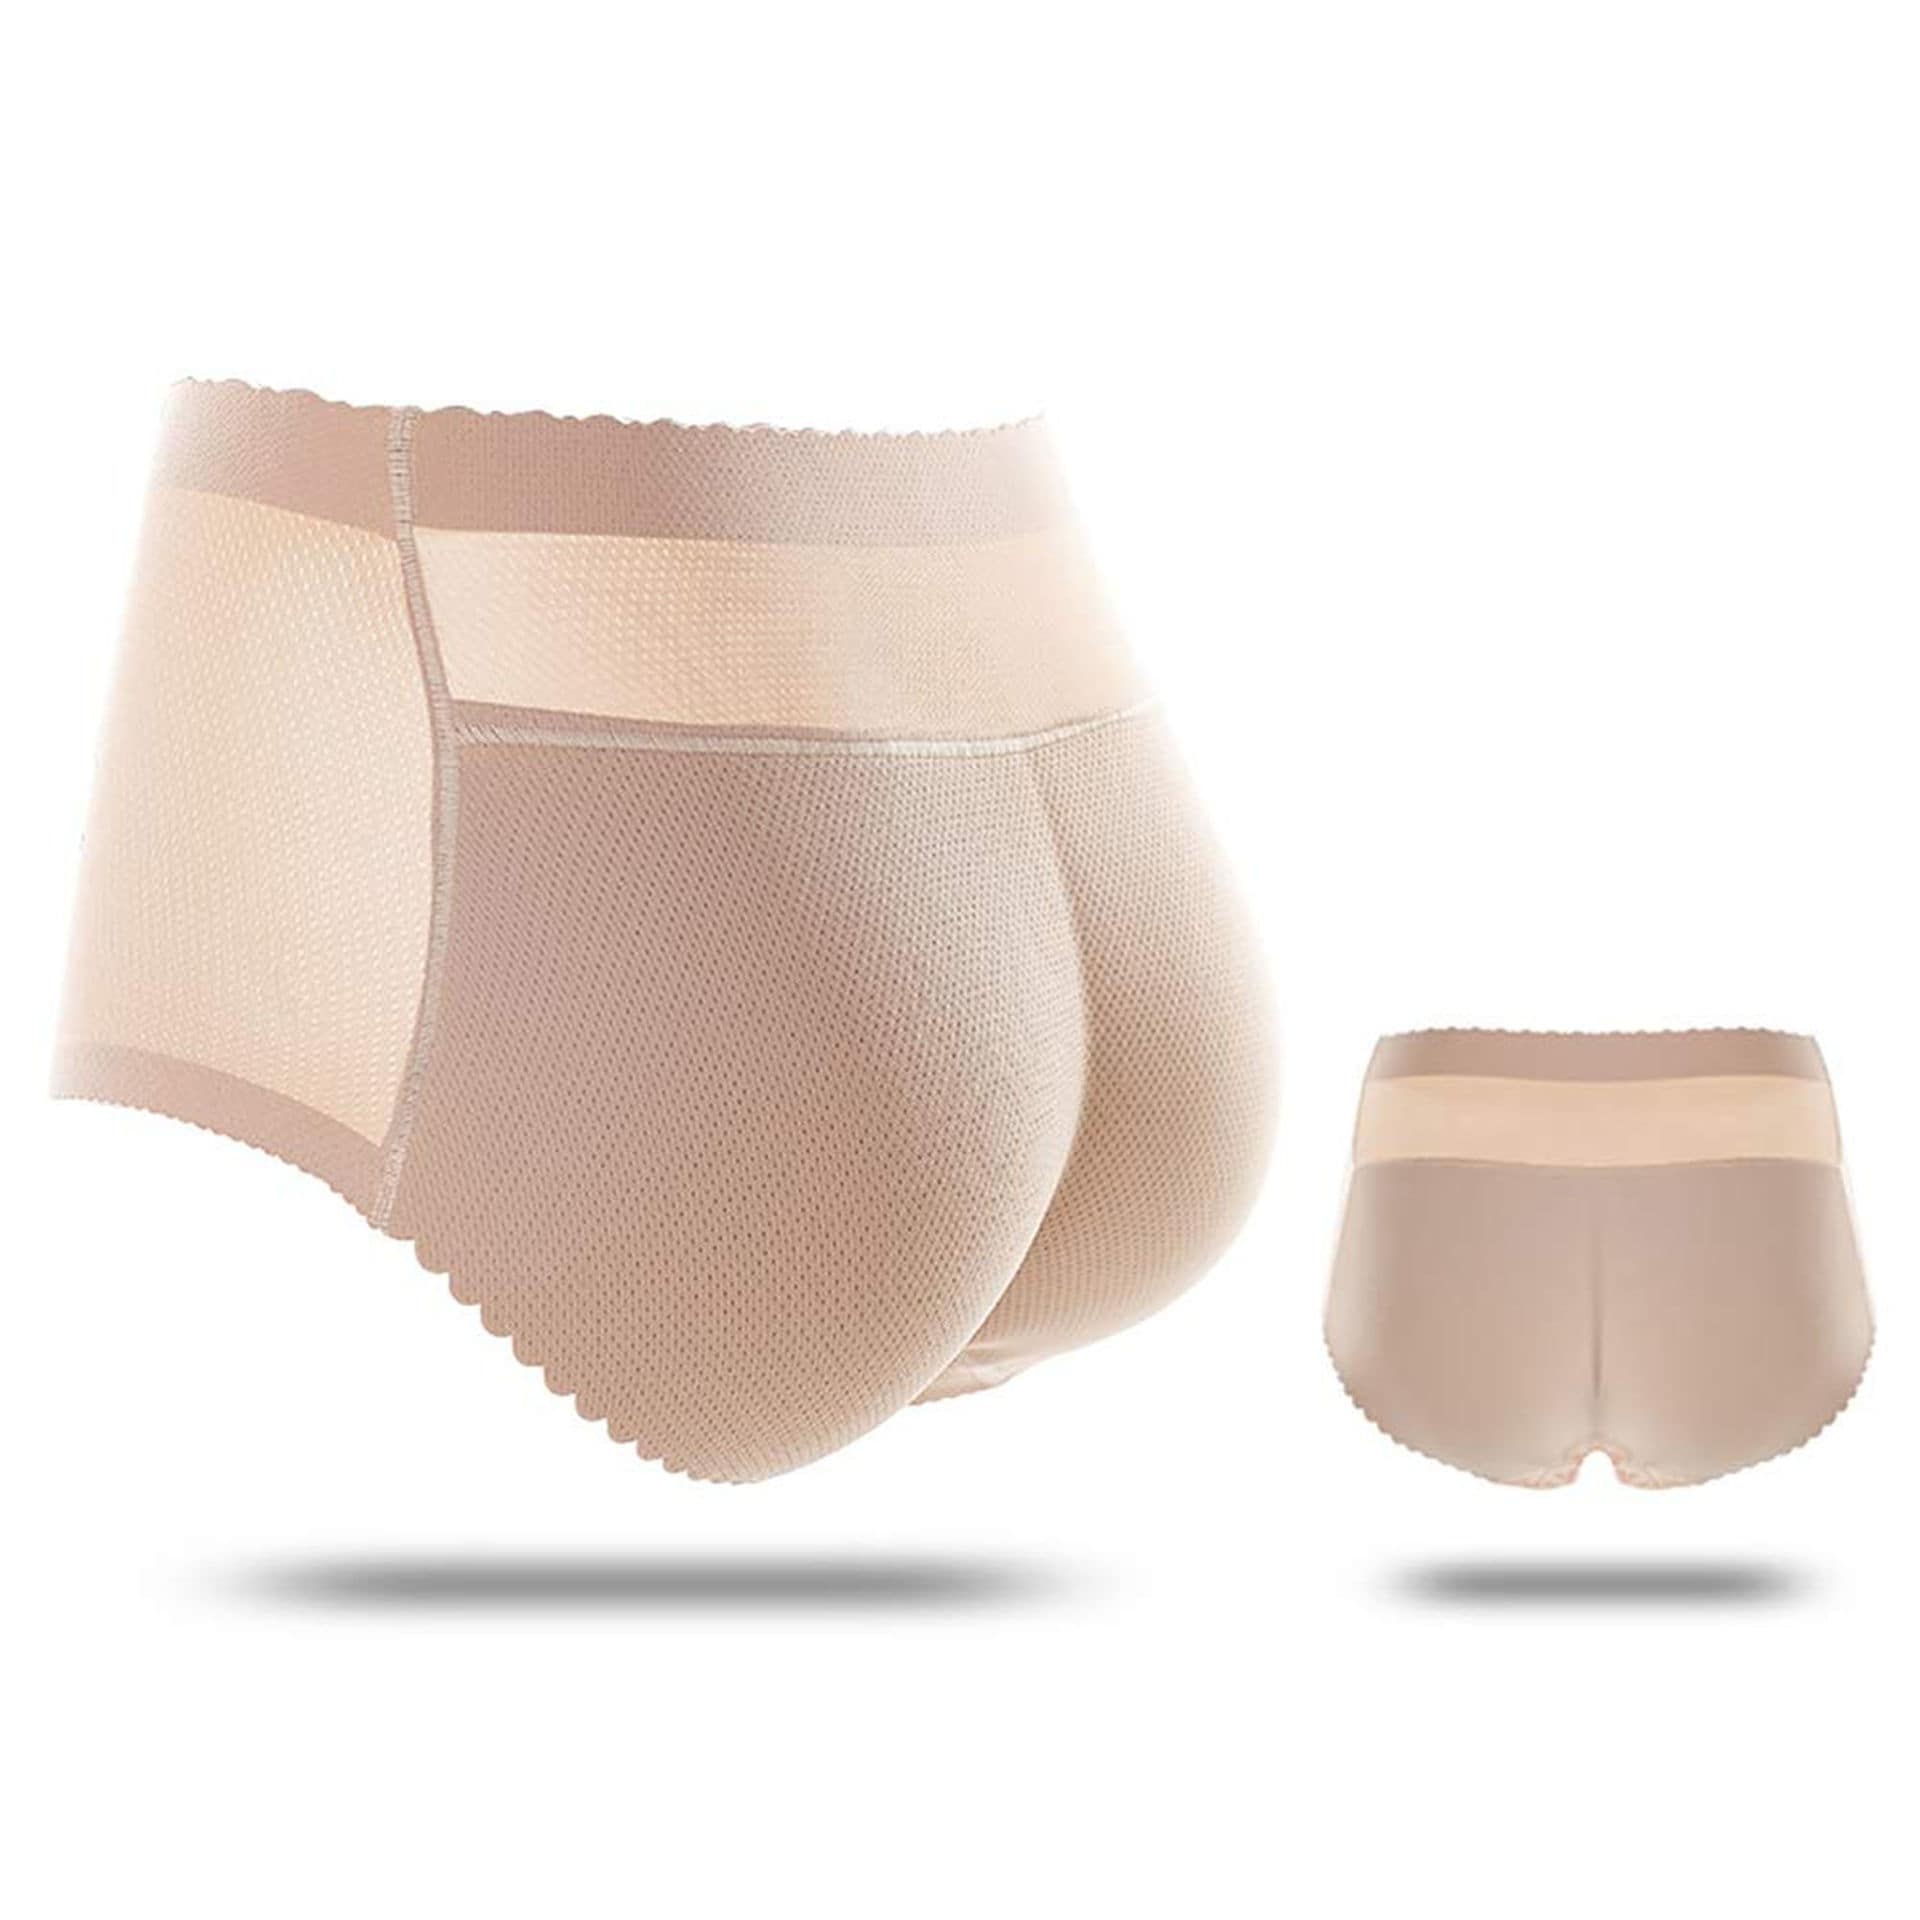 https://assets.dragonmart.ae//pictures/0712667_naor-women-booty-enhancer-hipster-panty-with-foam-butt-pads-large-skin.jpeg